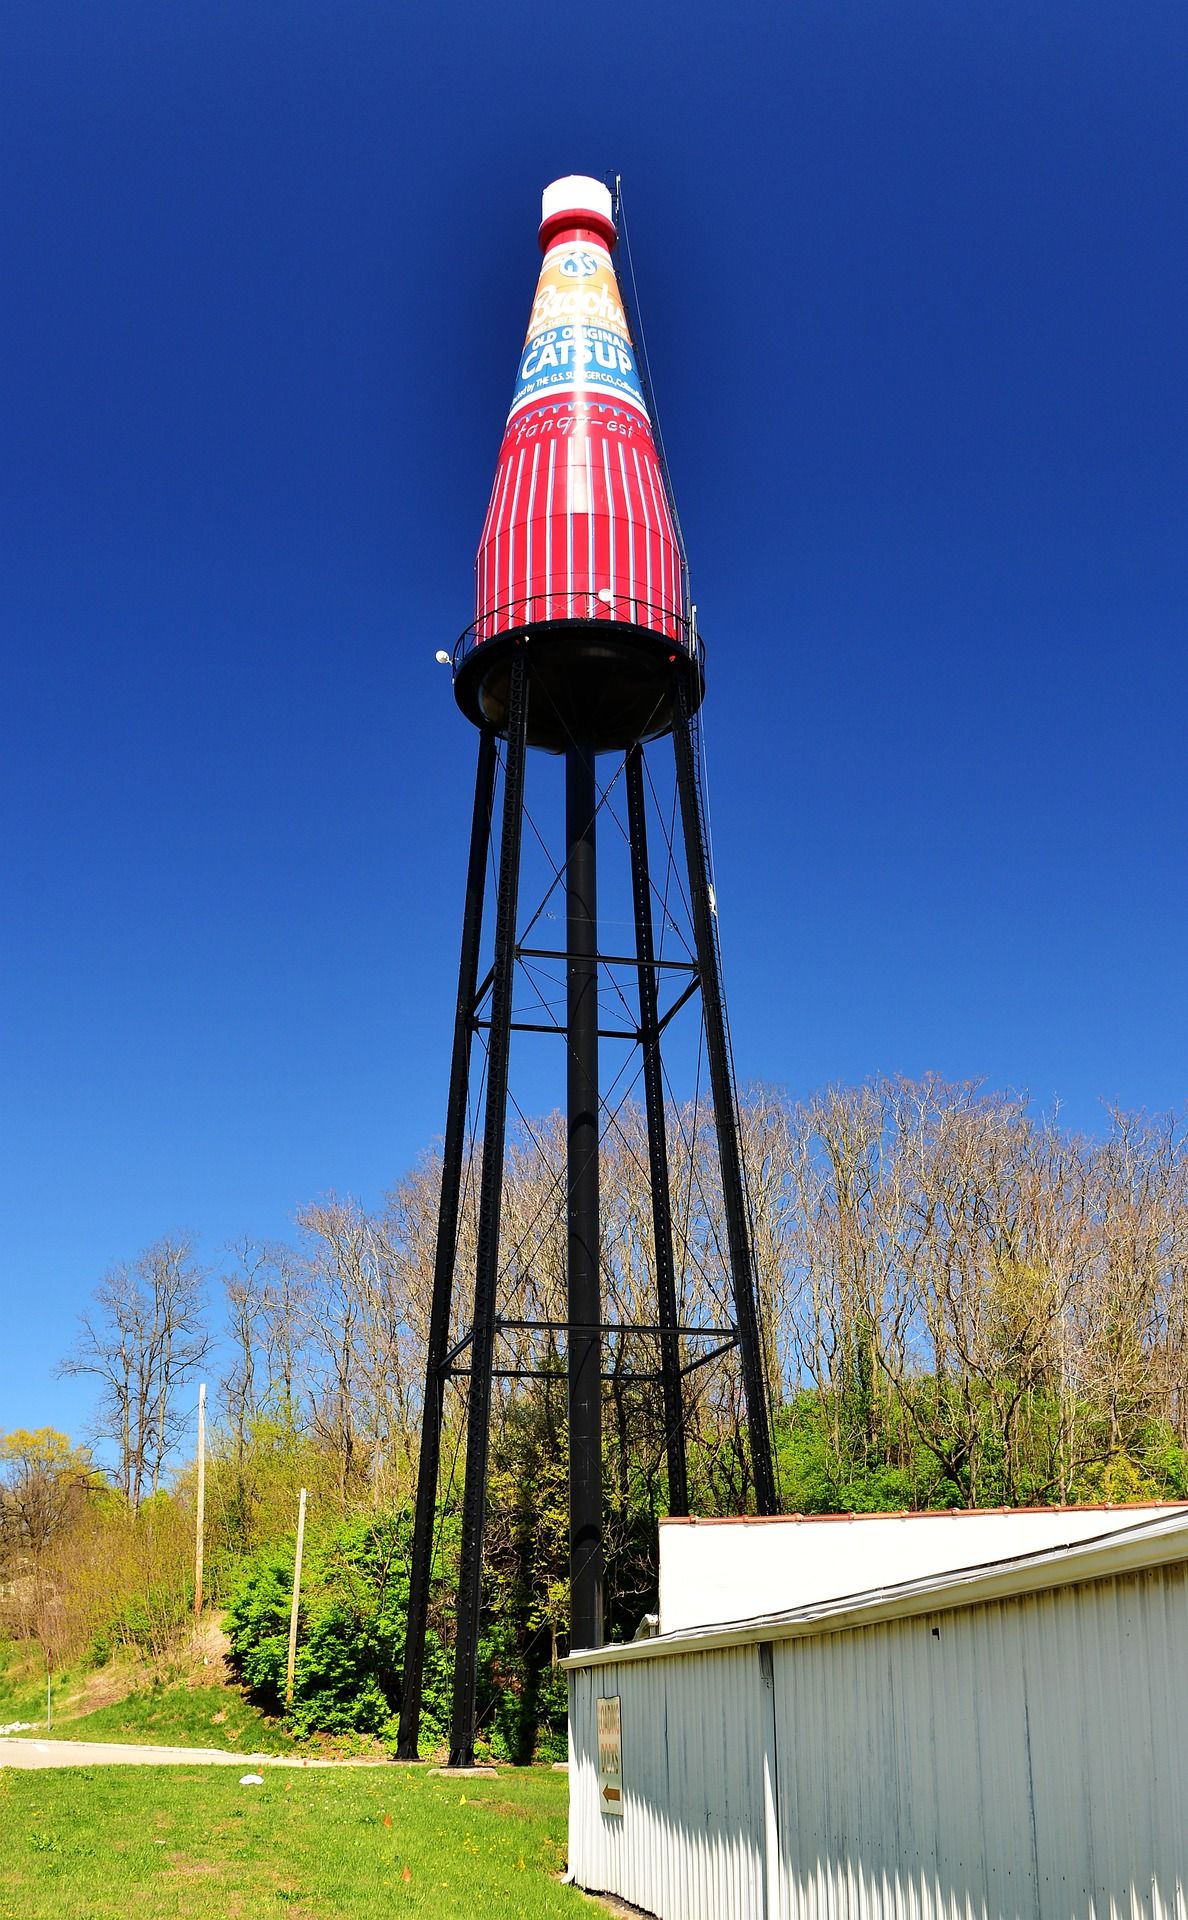 World's Largest catsup bottle and water tower in Collinsville, Illinois